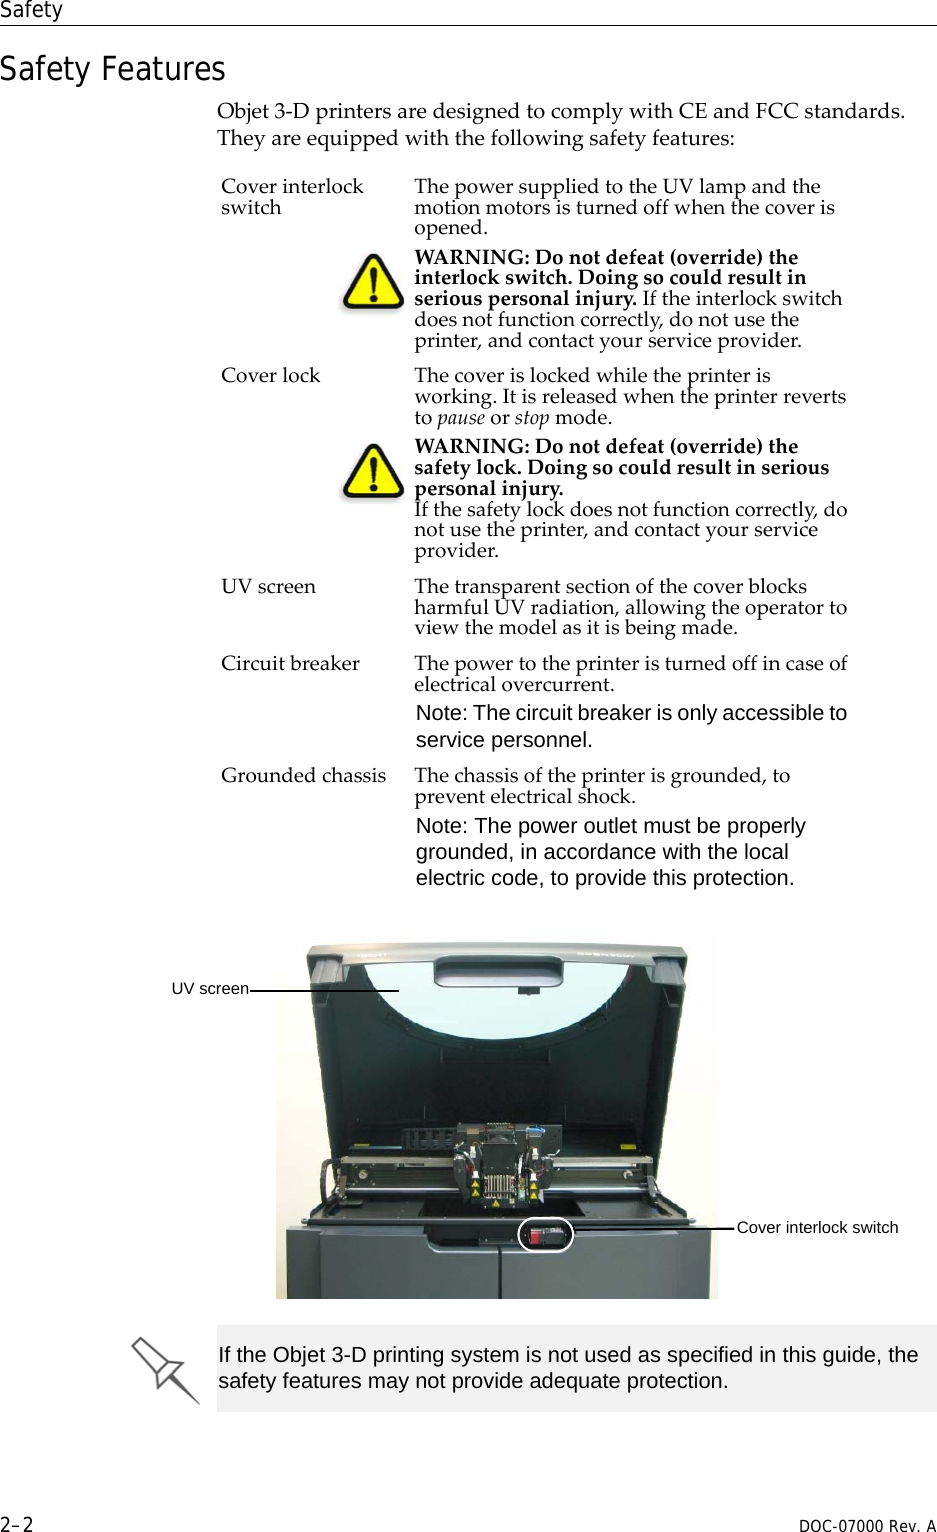 Safety2–2 DOC-07000 Rev. ASafety FeaturesObjet3‐DprintersaredesignedtocomplywithCEandFCCstandards.Theyareequippedwiththefollowingsafetyfeatures:Coverinterlockswitch ThepowersuppliedtotheUVlampandthemotionmotorsisturnedoffwhenthecoverisopened.WARNING:Donotdefeat(override)theinterlockswitch.Doingsocouldresultinseriouspersonalinjury.Iftheinterlockswitchdoesnotfunctioncorrectly,donotusetheprinter,andcontactyourserviceprovider.Coverlock Thecoverislockedwhiletheprinterisworking.Itisreleasedwhentheprinterrevertstopauseorstopmode.WARNING:Donotdefeat(override)thesafetylock.Doingsocouldresultinseriouspersonalinjury.Ifthesafetylockdoesnotfunctioncorrectly,donotusetheprinter,andcontactyourserviceprovider.UVscreenThetransparentsectionofthecoverblocksharmfulUVradiation,allowingtheoperatortoviewthemodelasitisbeingmade.Circuitbreaker Thepowertotheprinteristurnedoffincaseofelectricalovercurrent.Note: The circuit breaker is only accessible to service personnel.Groundedchassis Thechassisoftheprinterisgrounded,topreventelectricalshock.Note: The power outlet must be properly grounded, in accordance with the local electric code, to provide this protection.UV screenCover interlock switchIf the Objet 3-D printing system is not used as specified in this guide, the safety features may not provide adequate protection.